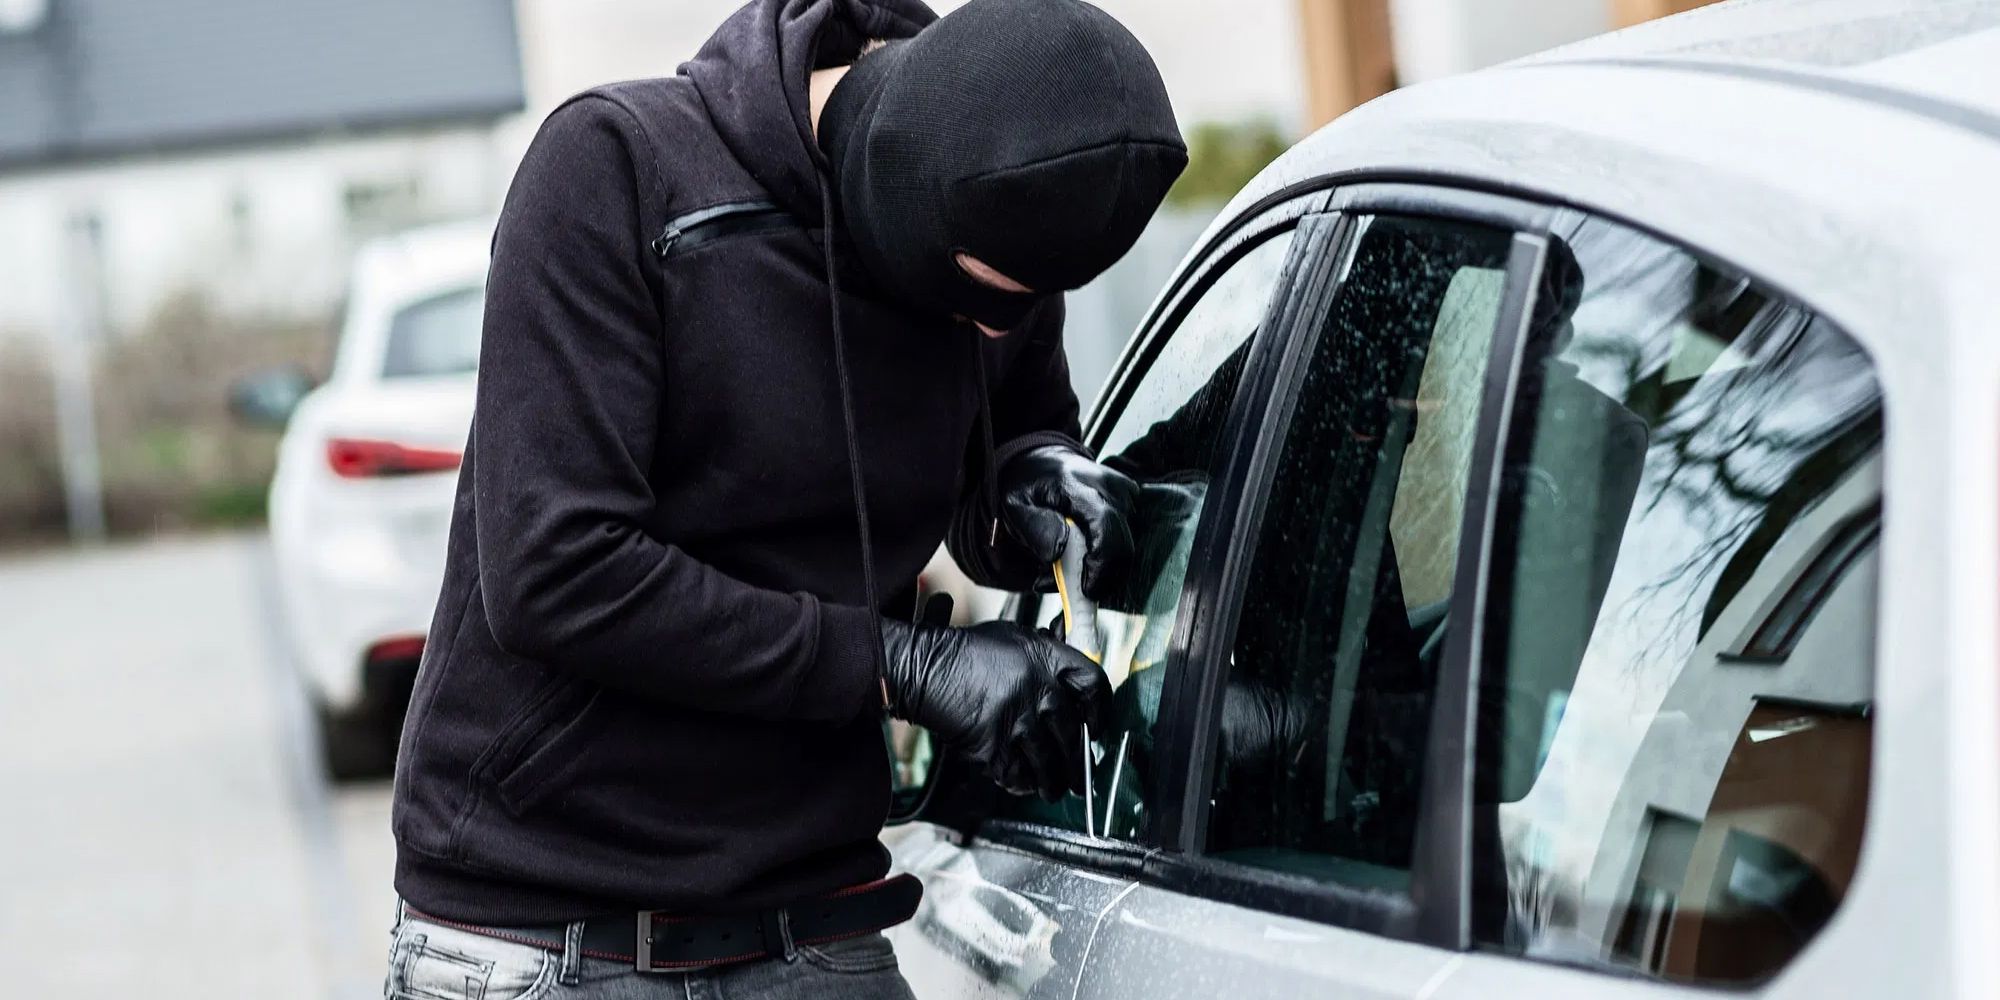 10 Proven Anti Theft Methods To Prevent Car Thefts And Break Ins On Any Vehicle